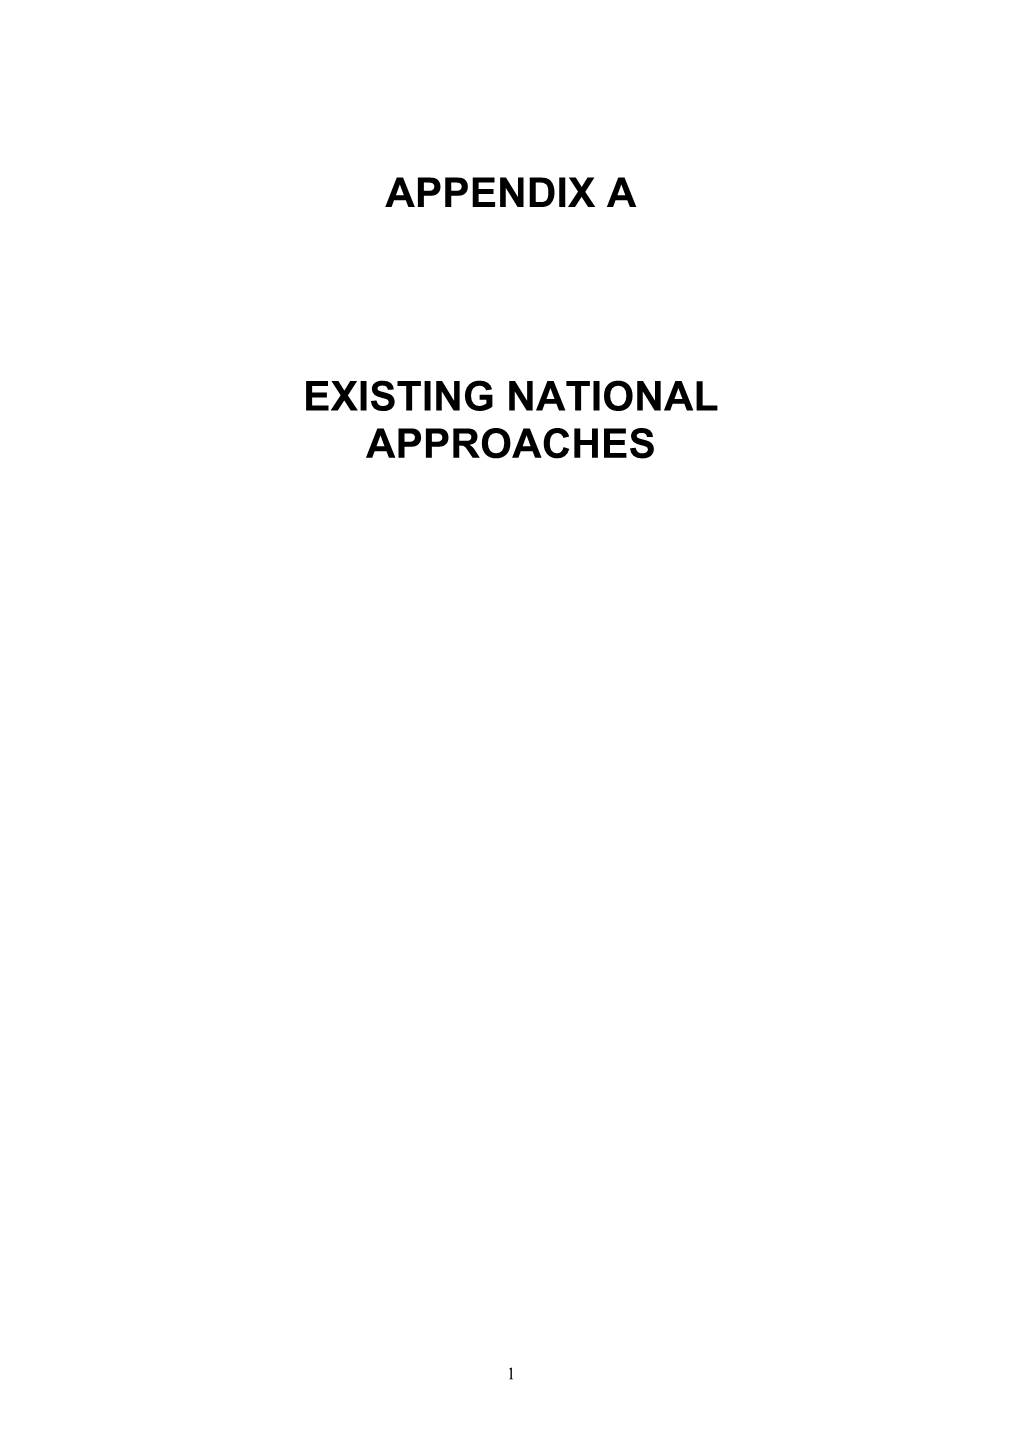 Existing National Approaches